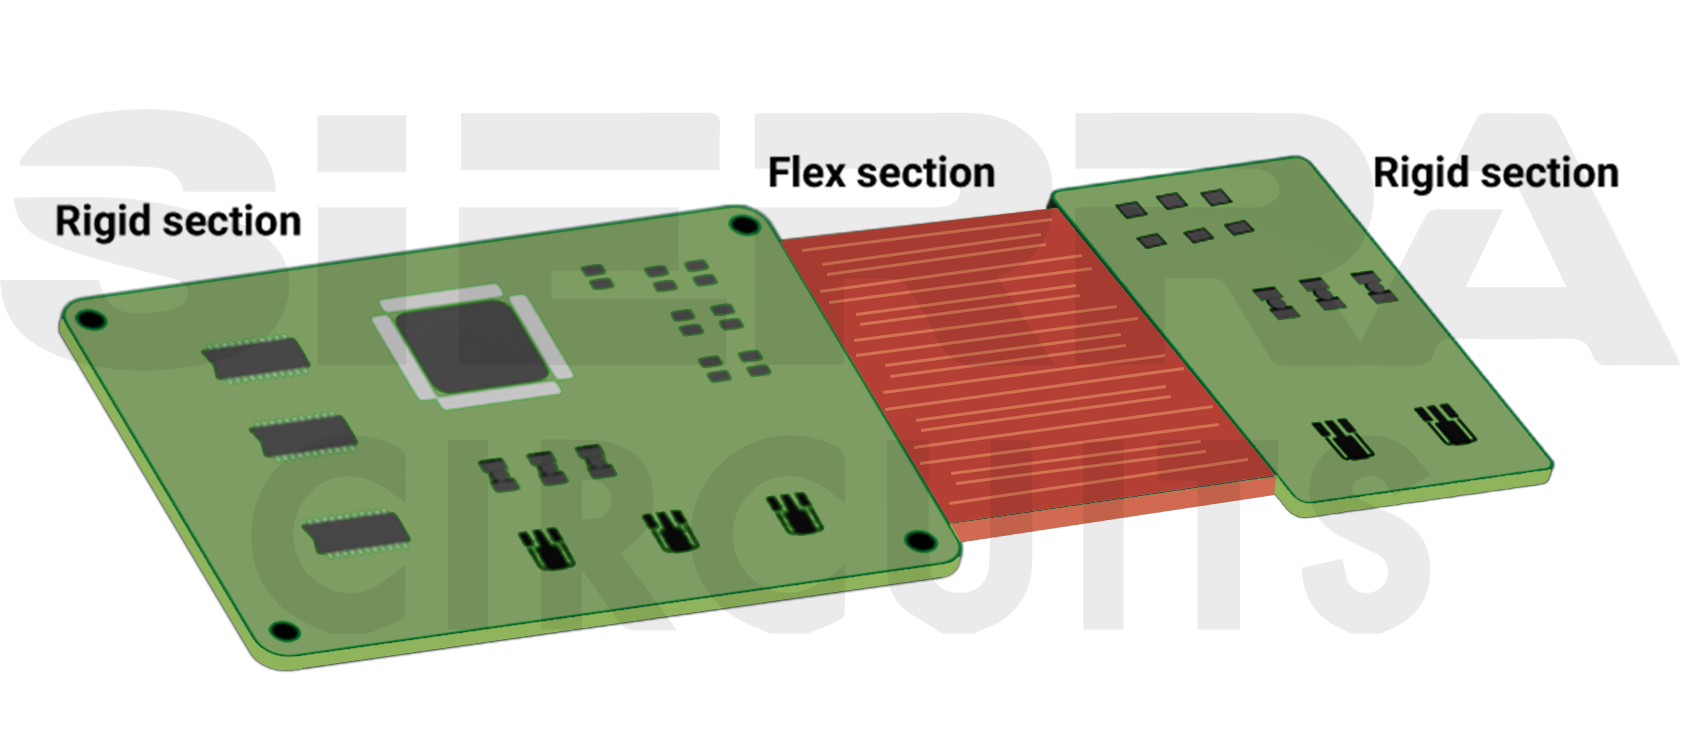 rigid-and-flex-section-in-pcb.jpg